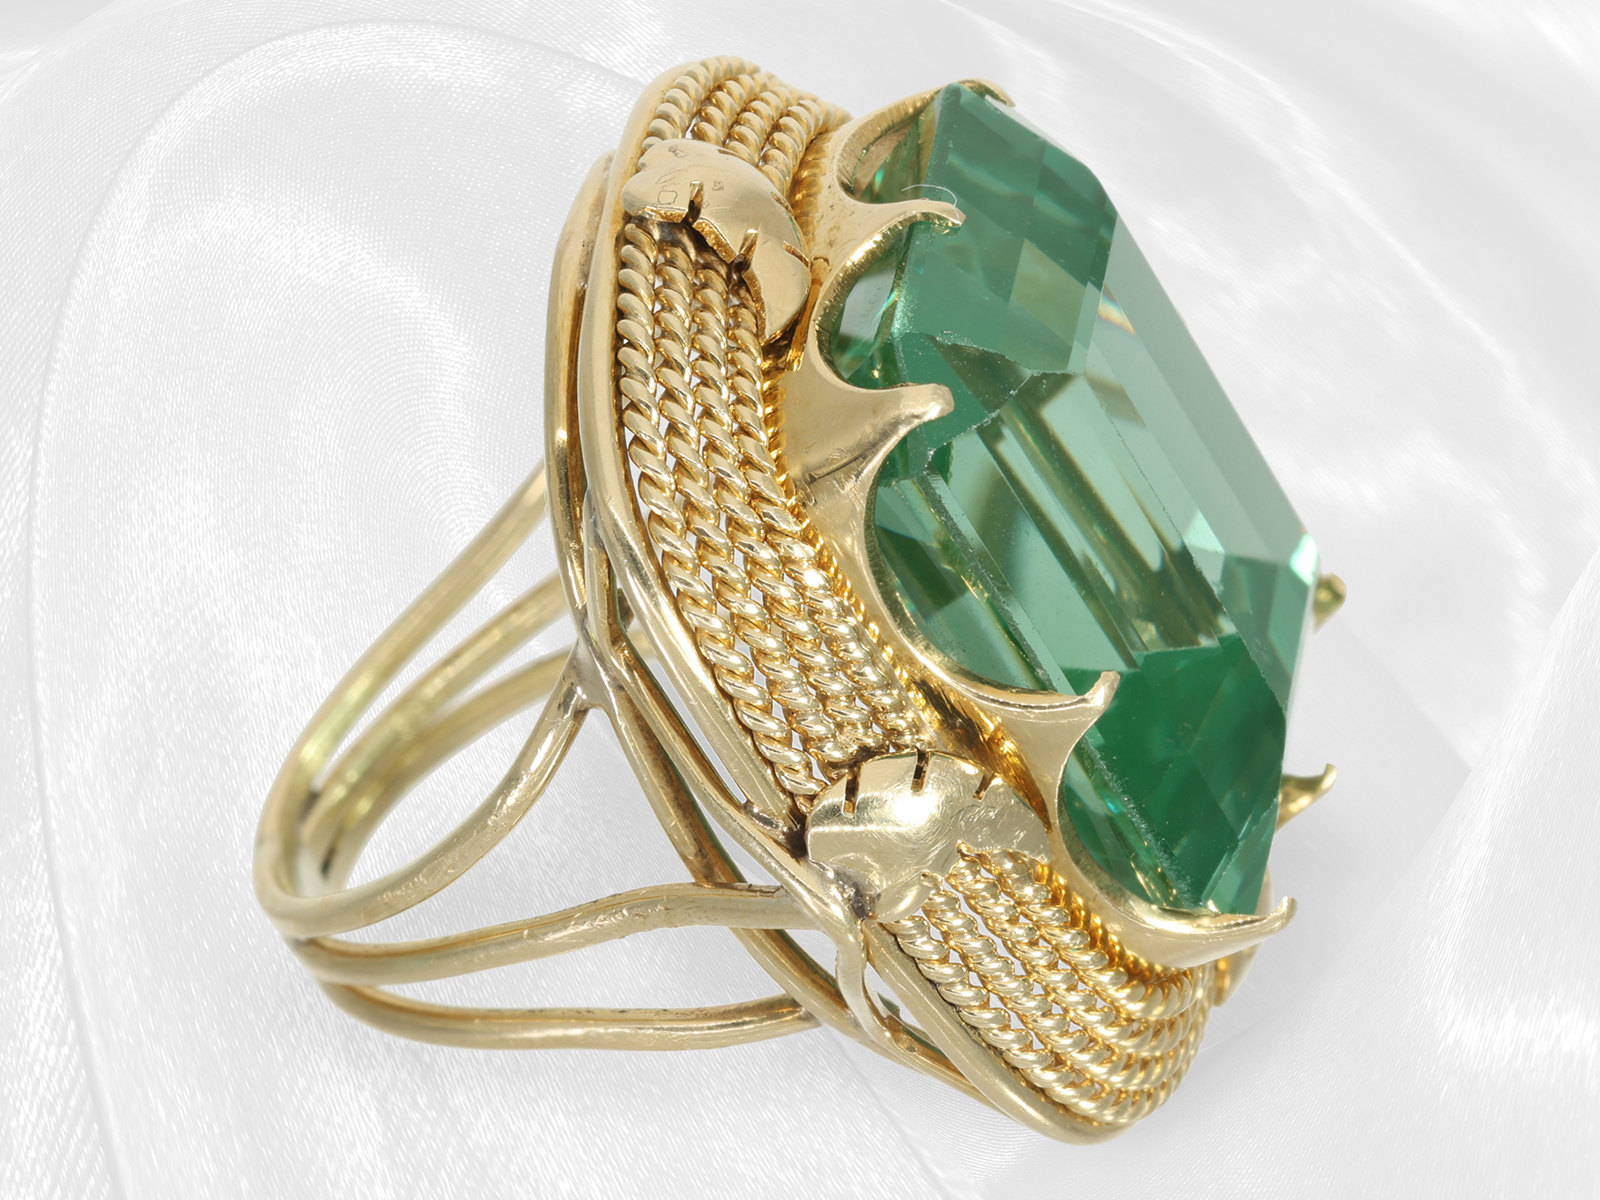 Ring: extraordinary vintage goldsmith ring with green gemstone, old 14K gold handwork - Image 4 of 5